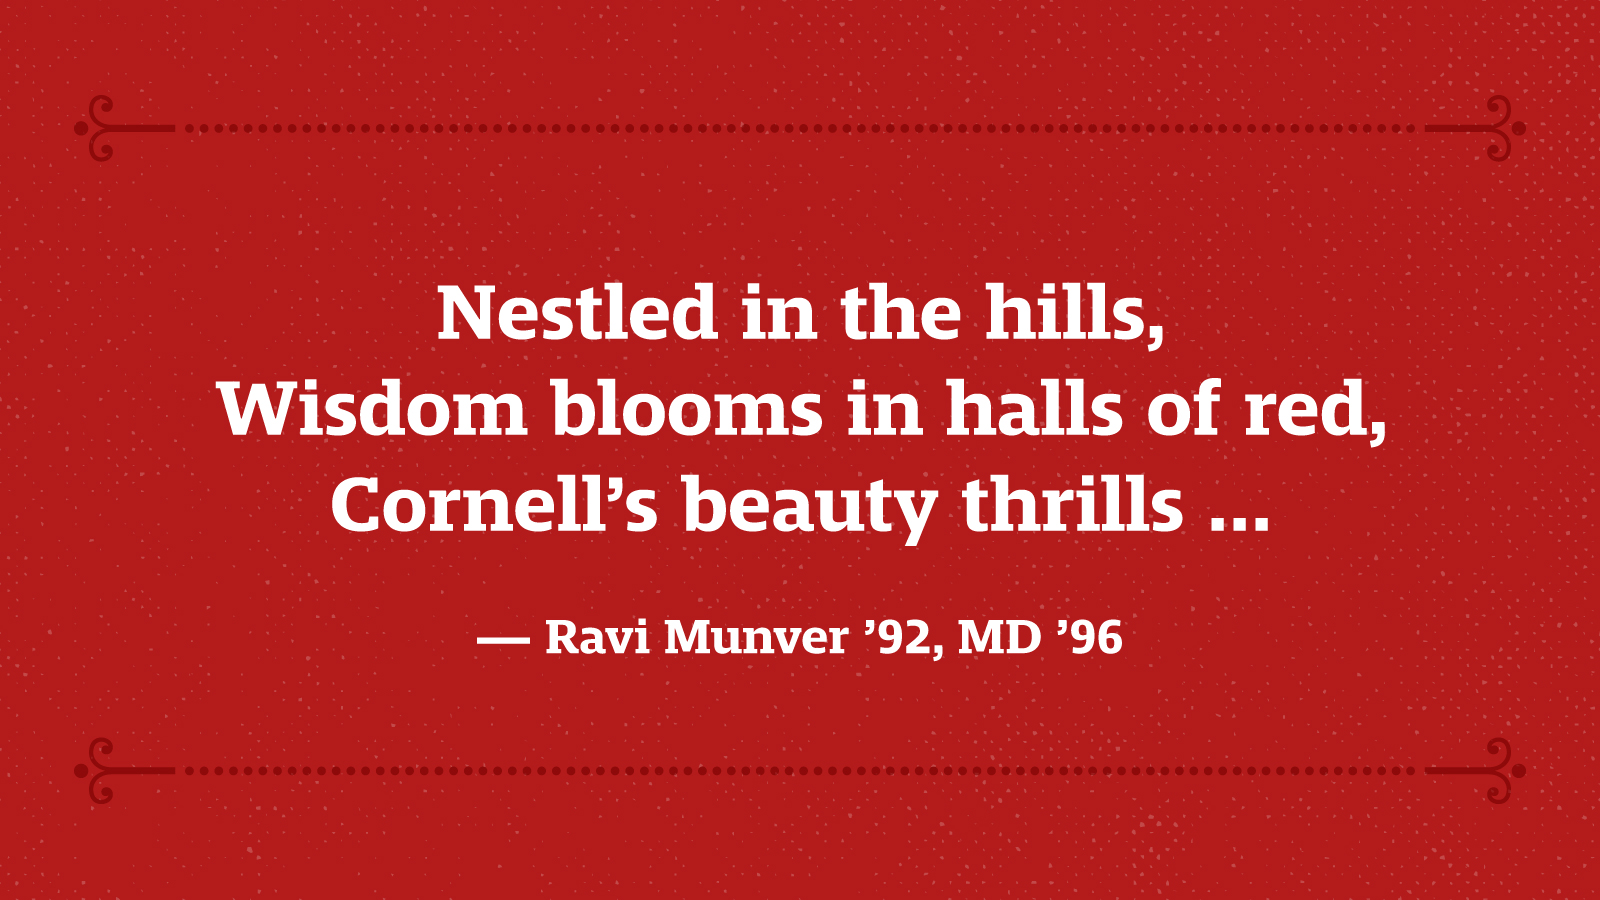 Nestled in the hills, Wisdom blooms in halls of red, Cornell’s beauty thrills … — Ravi Munver ’92, MD ’96